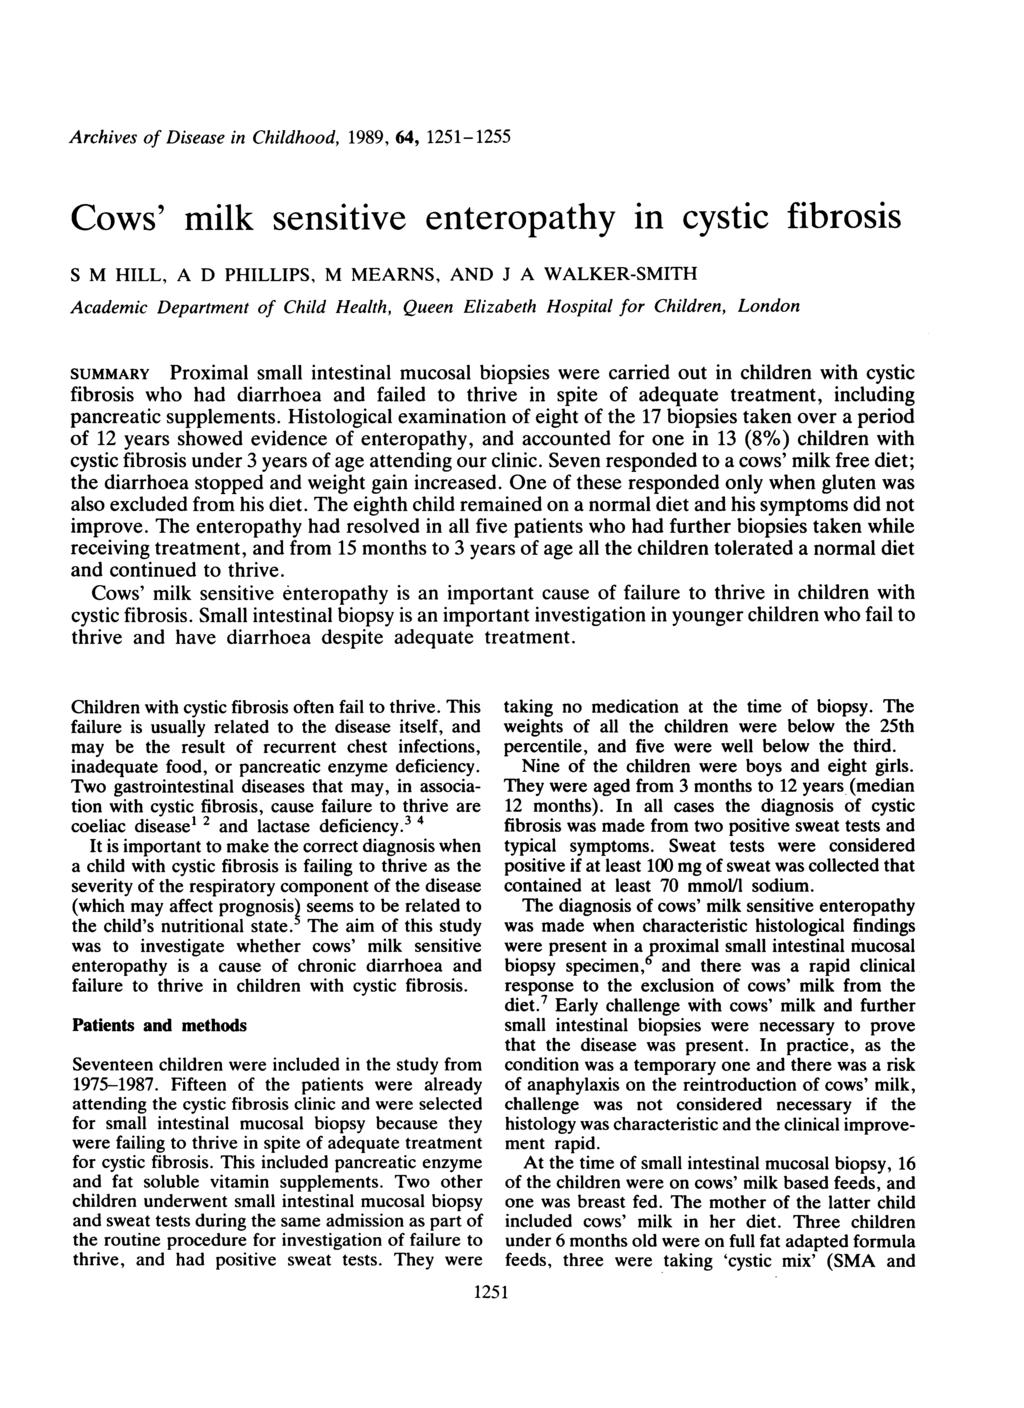 Archives of Disese in Childhood, 1989, 64, 1251-1255 Cows' milk sensitive enteropthy in cystic fibrosis S M HILL, A D PHILLIPS, M MEARNS, AND J A WALKER-SMITH Acdemic Deprtment of Child Helth, Queen